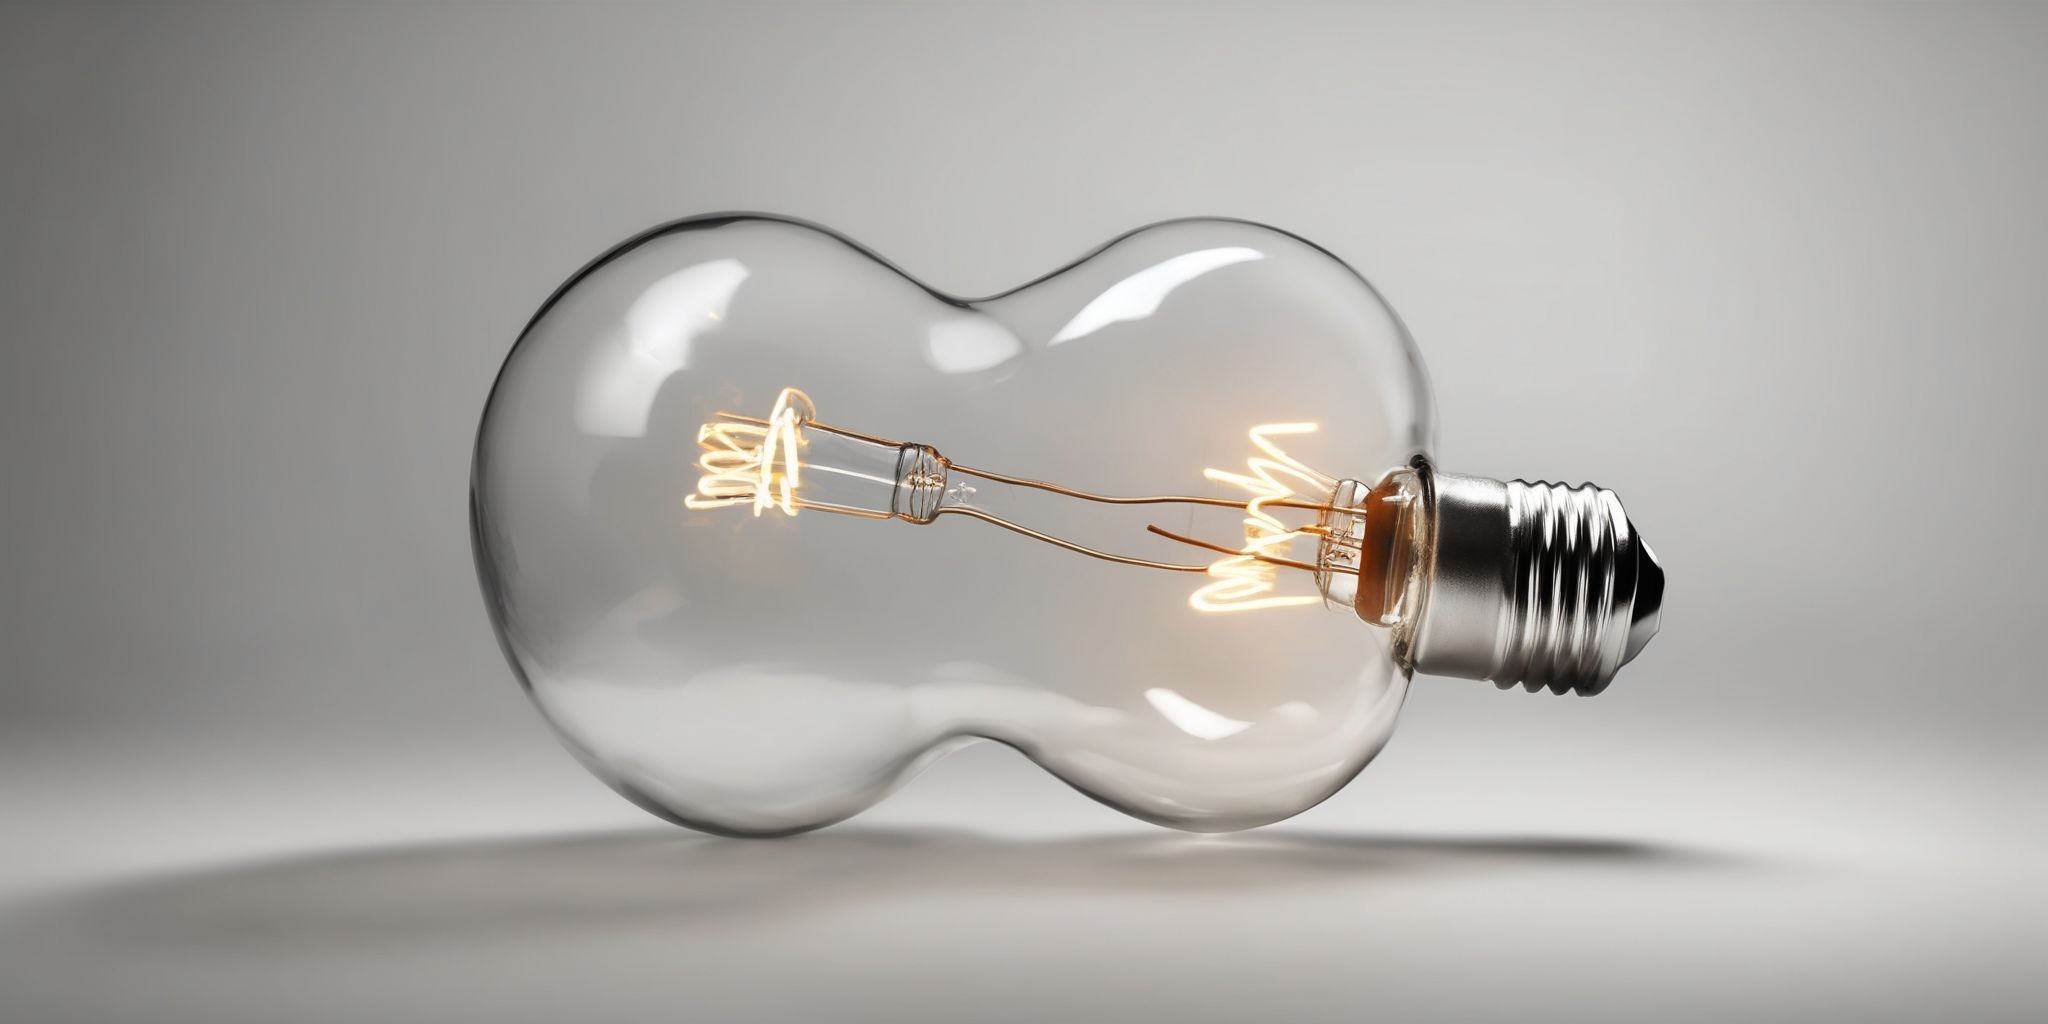 Lightbulb  in realistic, photographic style